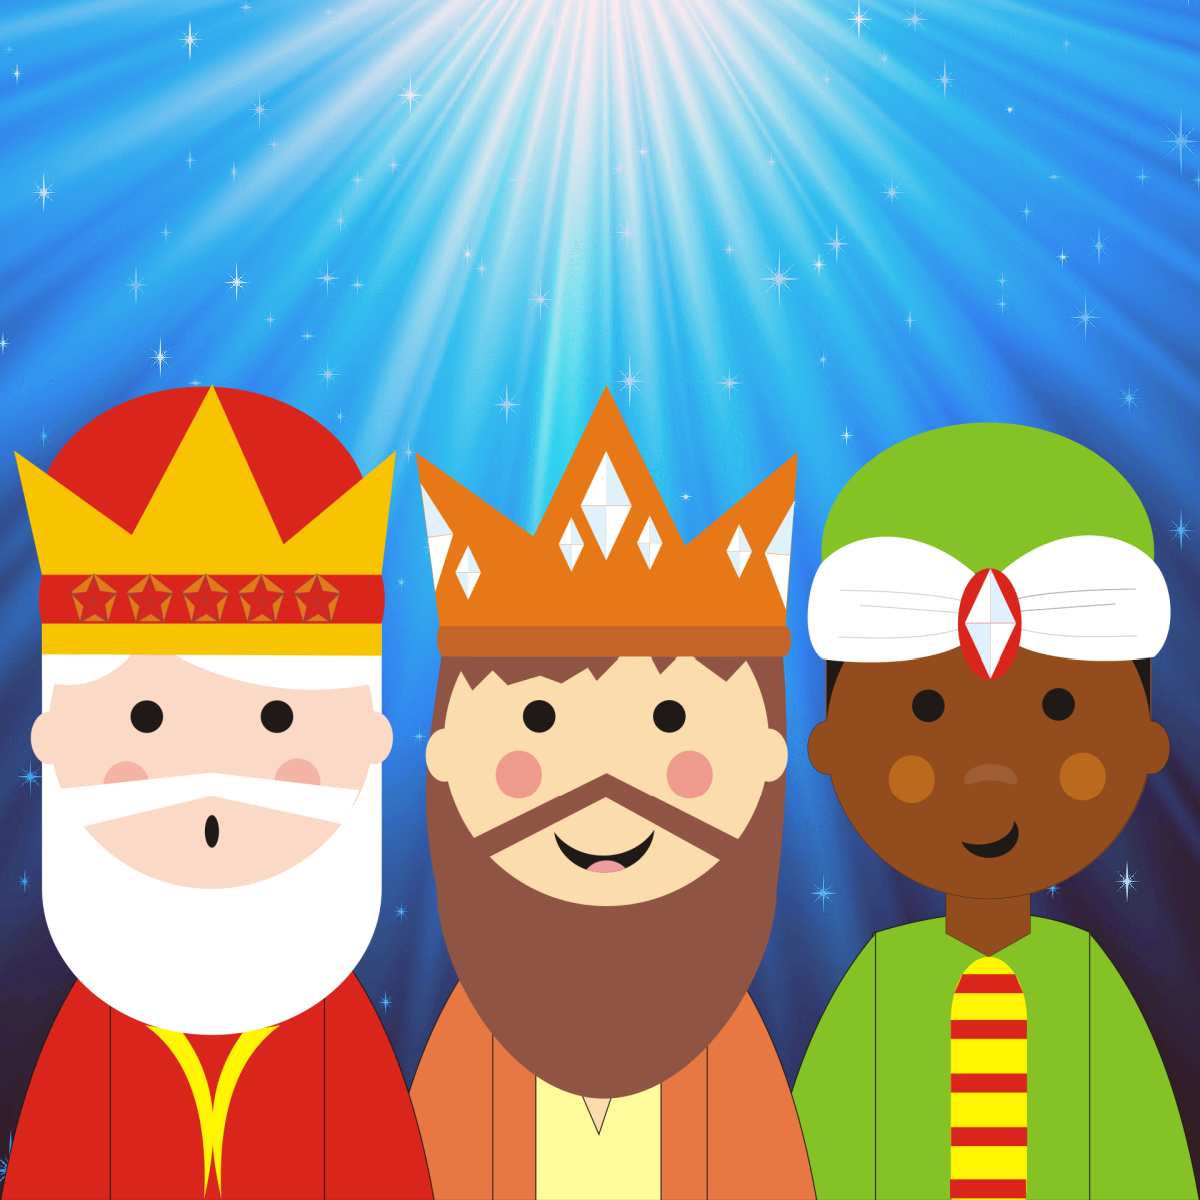 Feast of Epiphany: glimpsing the beauty of God